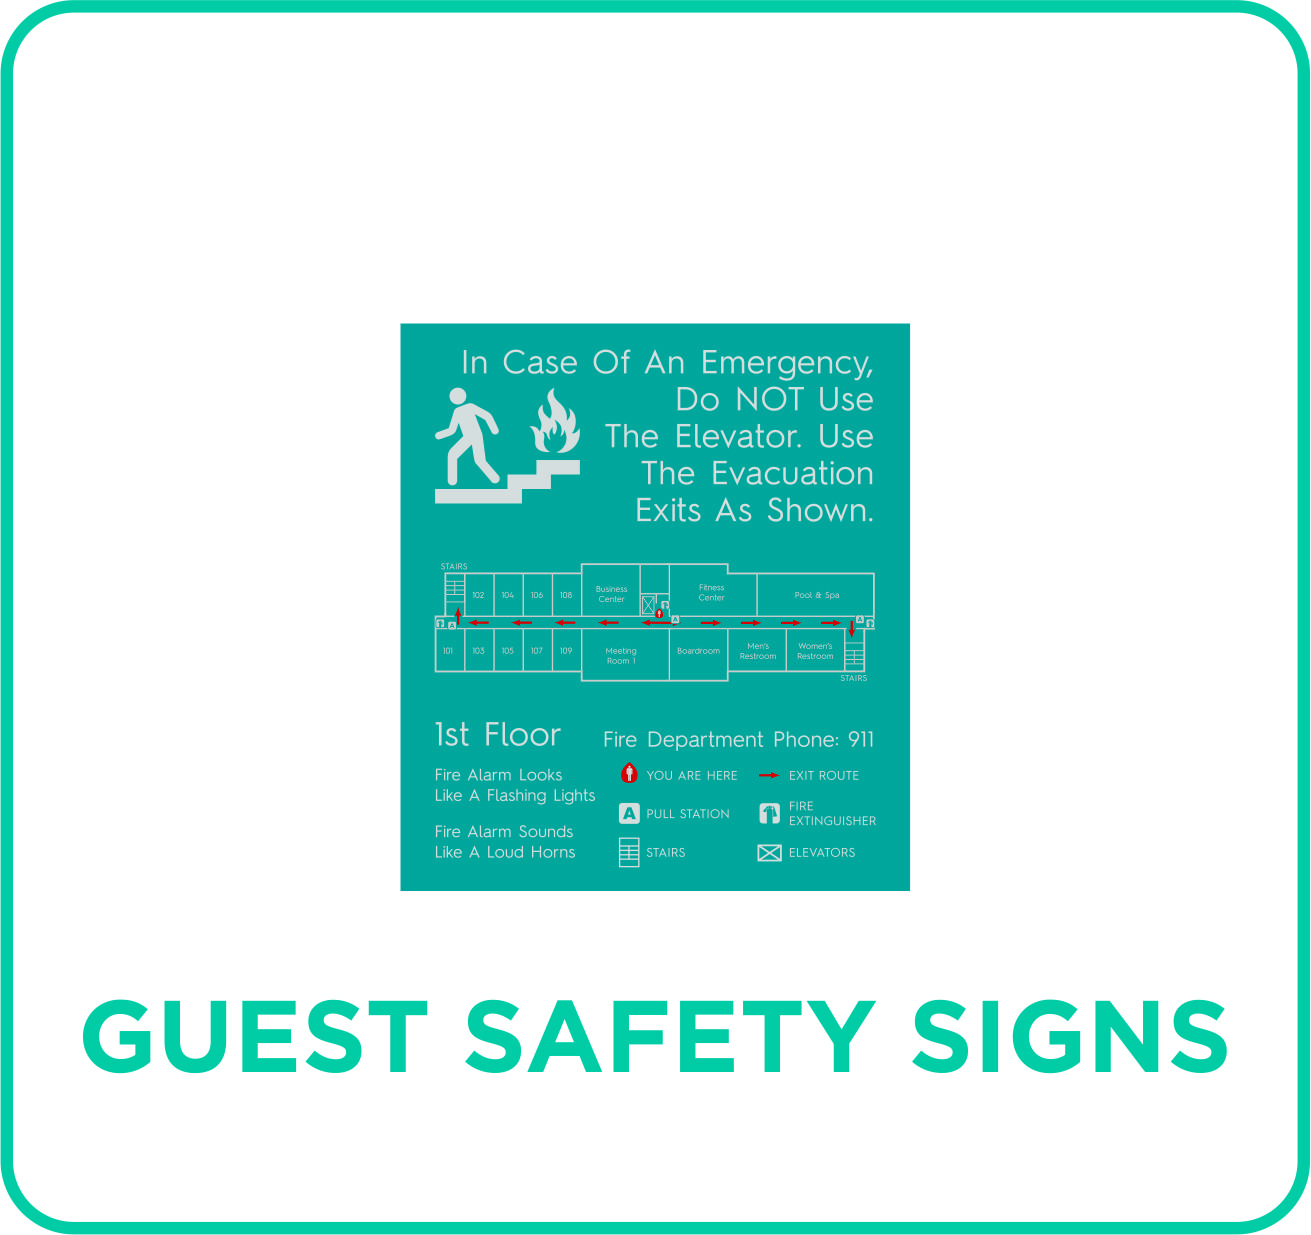 Signature Inn - Guest Safety Signs